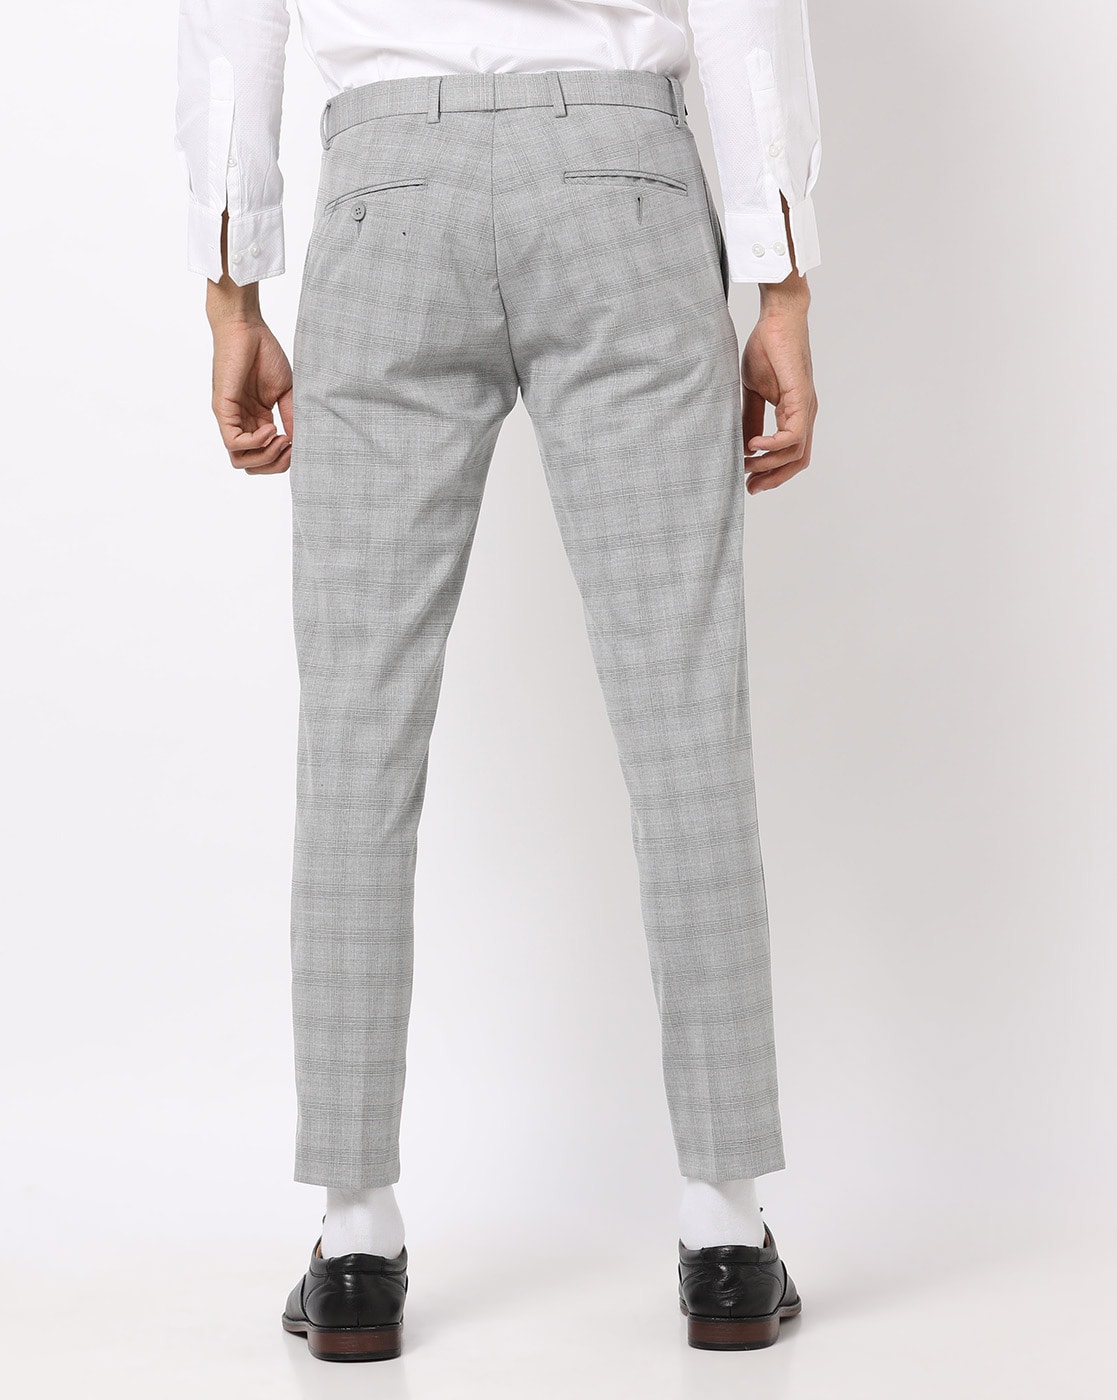 Love these grey checked trousers | Mens fashion casual, Mens winter  fashion, Mens fashion dressy